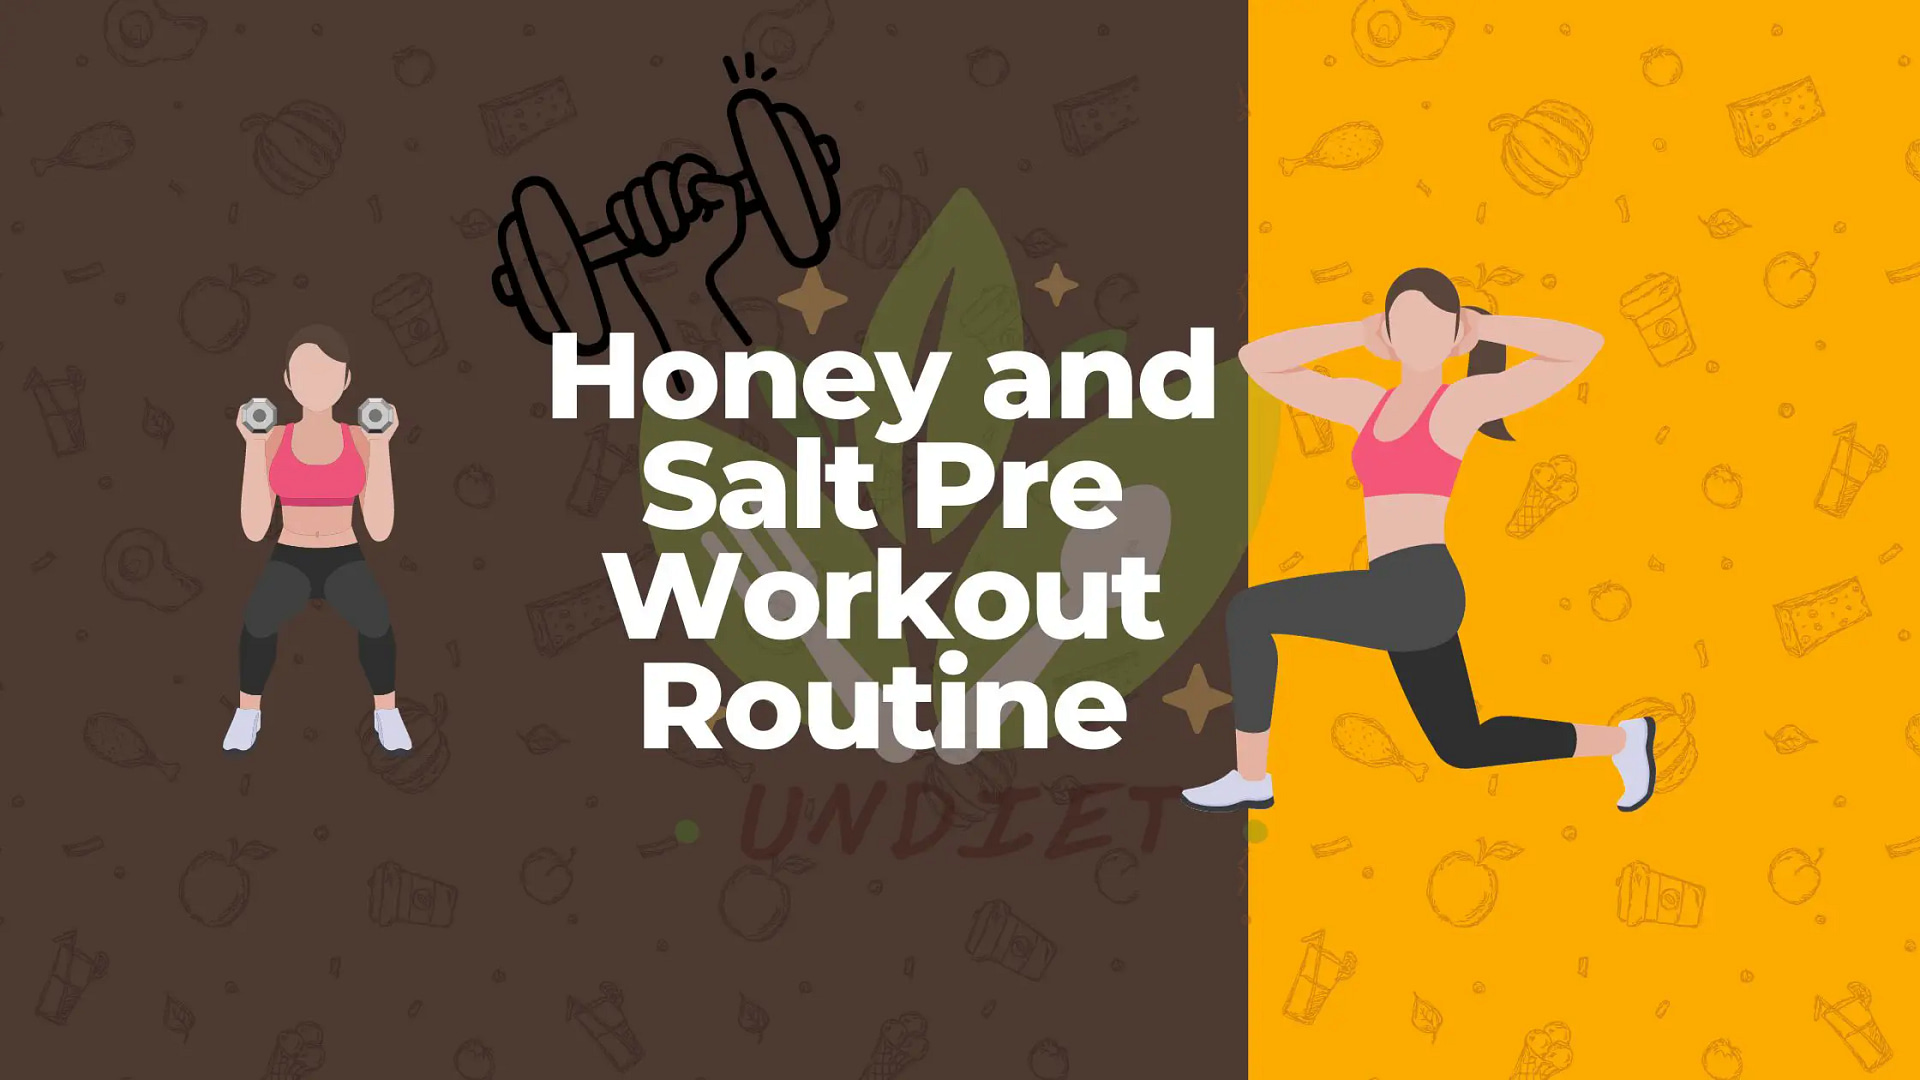 Honey and Salt Pre Workout Routine